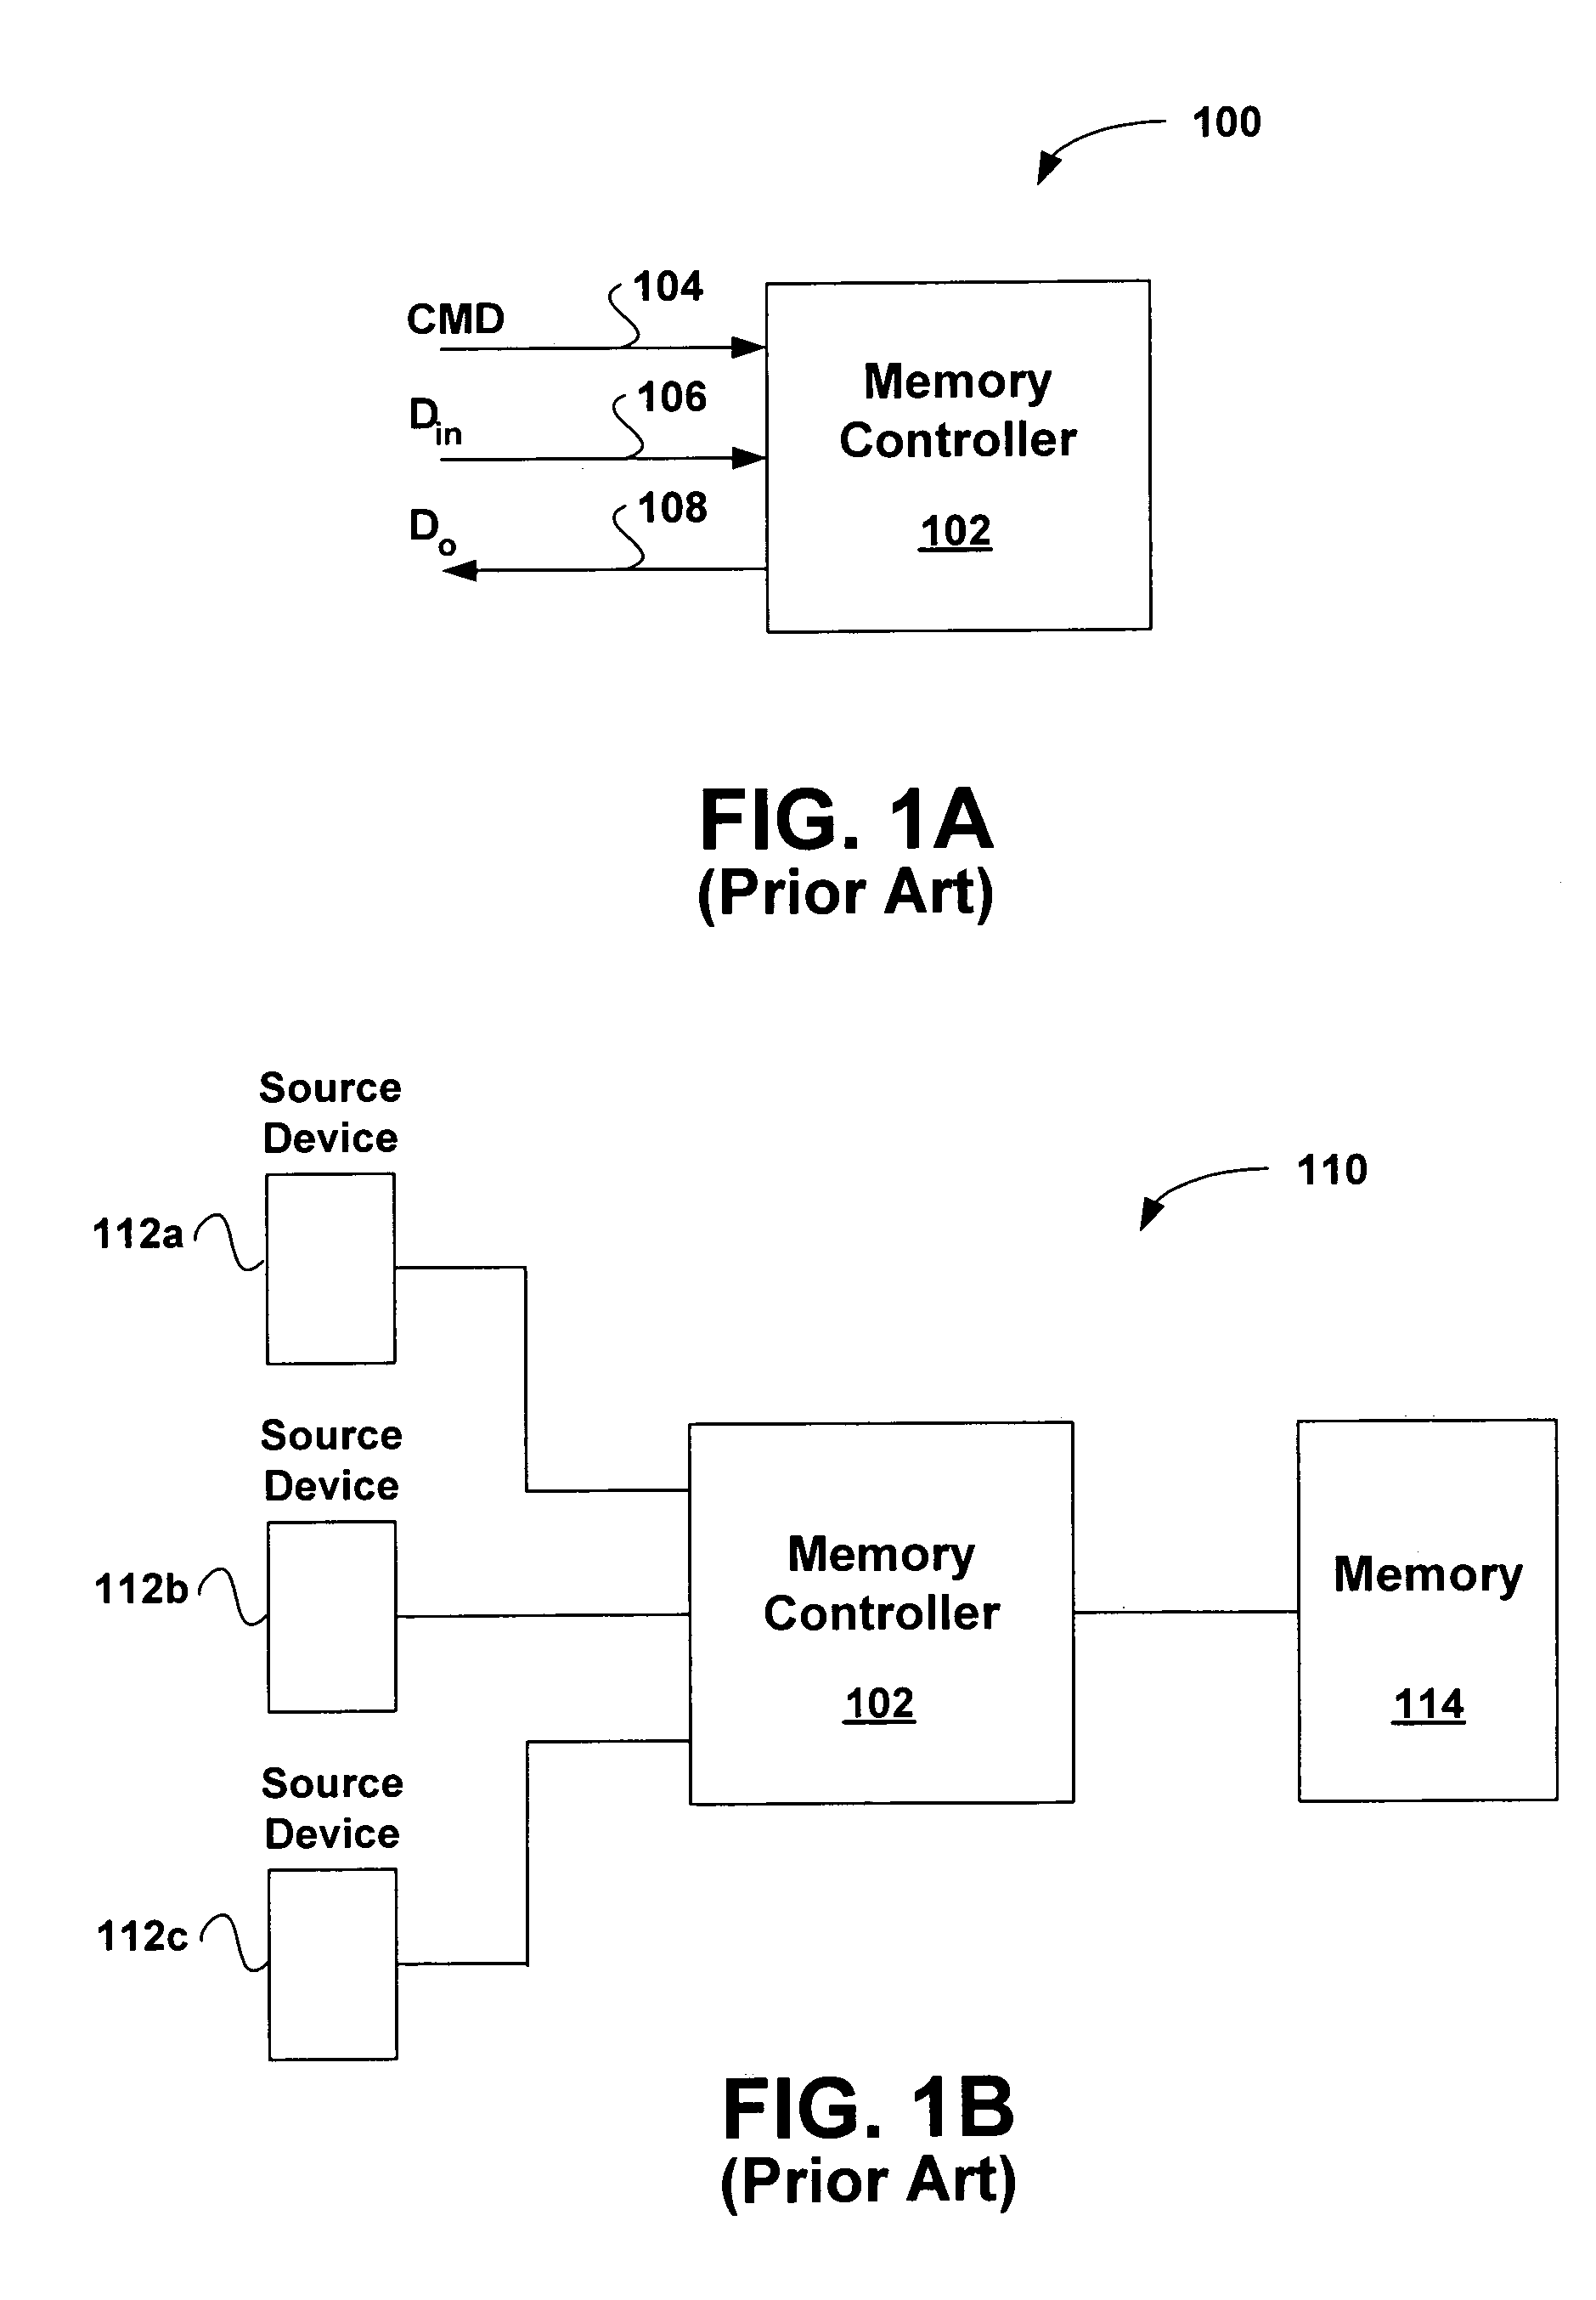 Port independent data transaction interface for multi-port devices